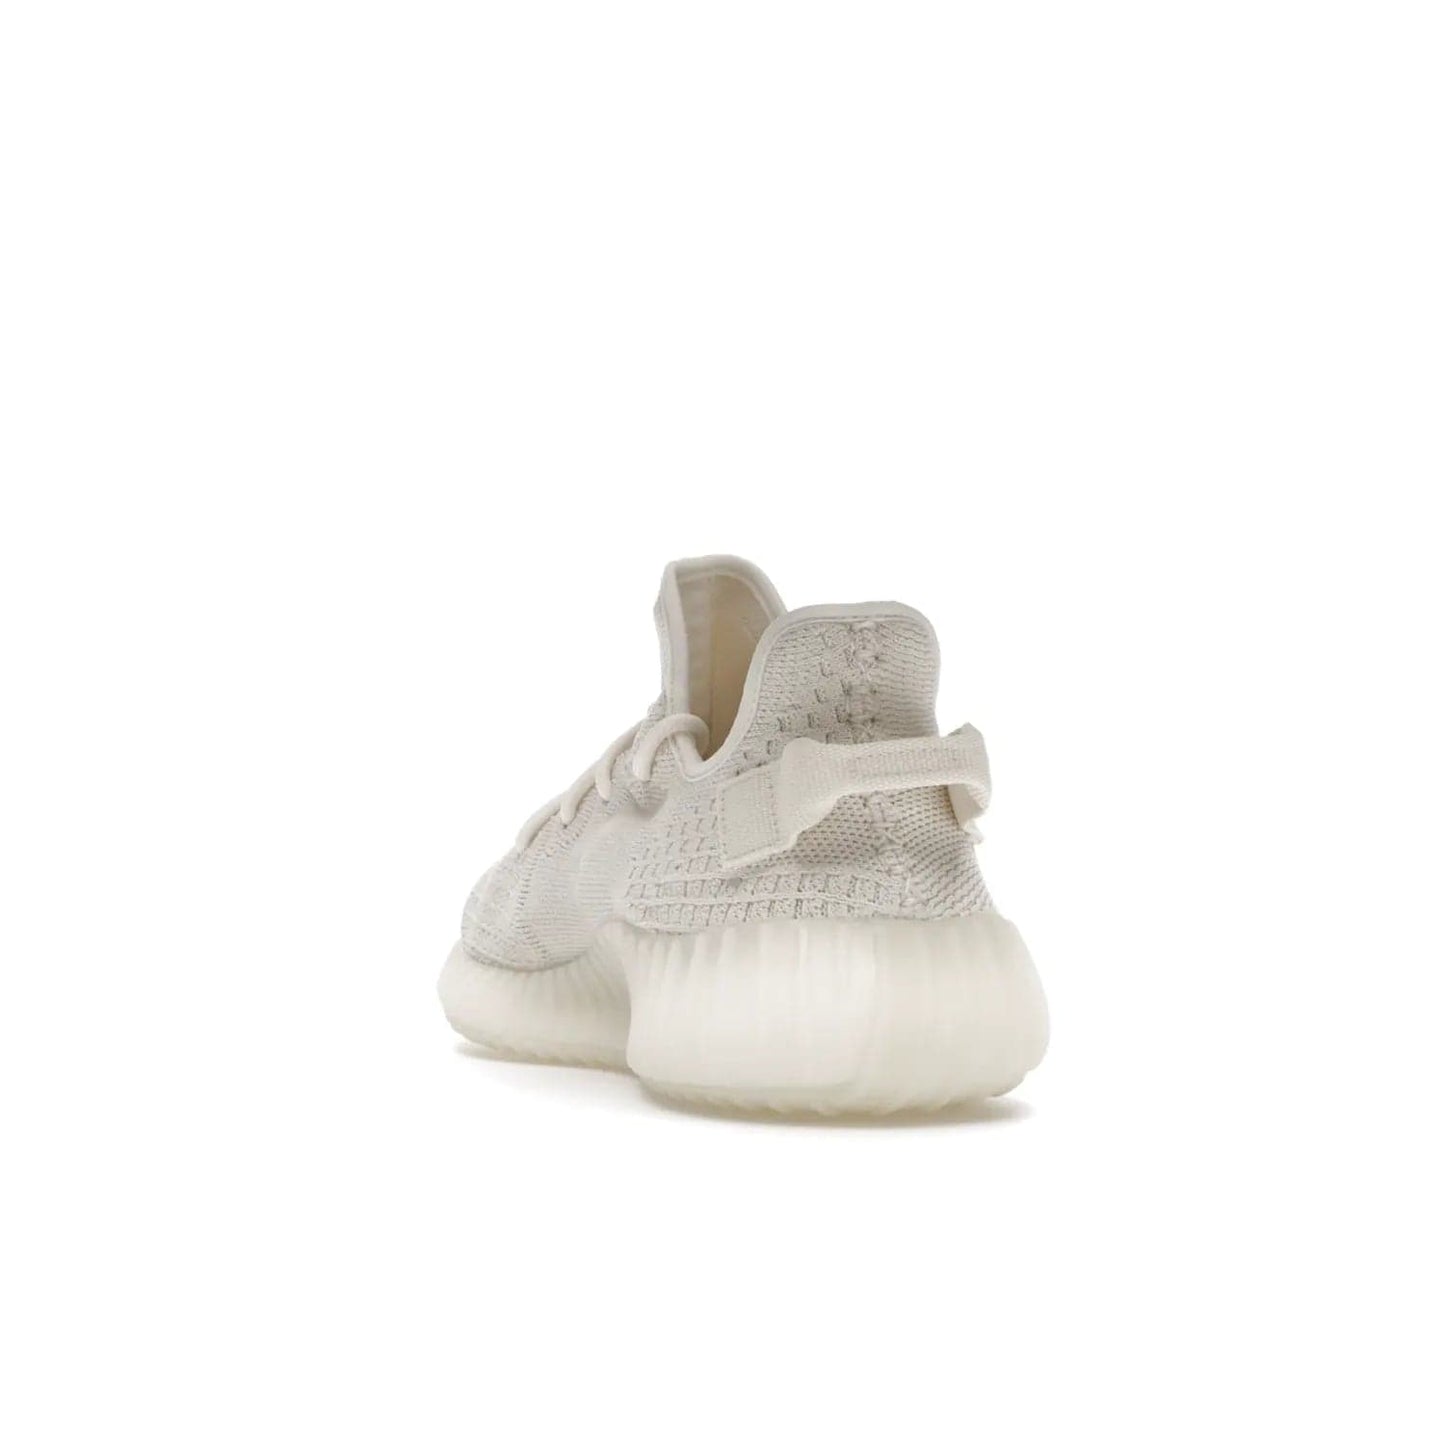 adidas Yeezy Boost 350 V2 Bone - Image 26 - Only at www.BallersClubKickz.com - Grab the stylish and comfortable adidas Yeezy Boost 350 V2 Bone in March 2022. This sneaker features a triple white Primeknit upper, mesh side stripes and canvas heel tabs, sitting atop a semi-translucent sole with Boost technology. Sure to keep your feet comfortable and stylish!